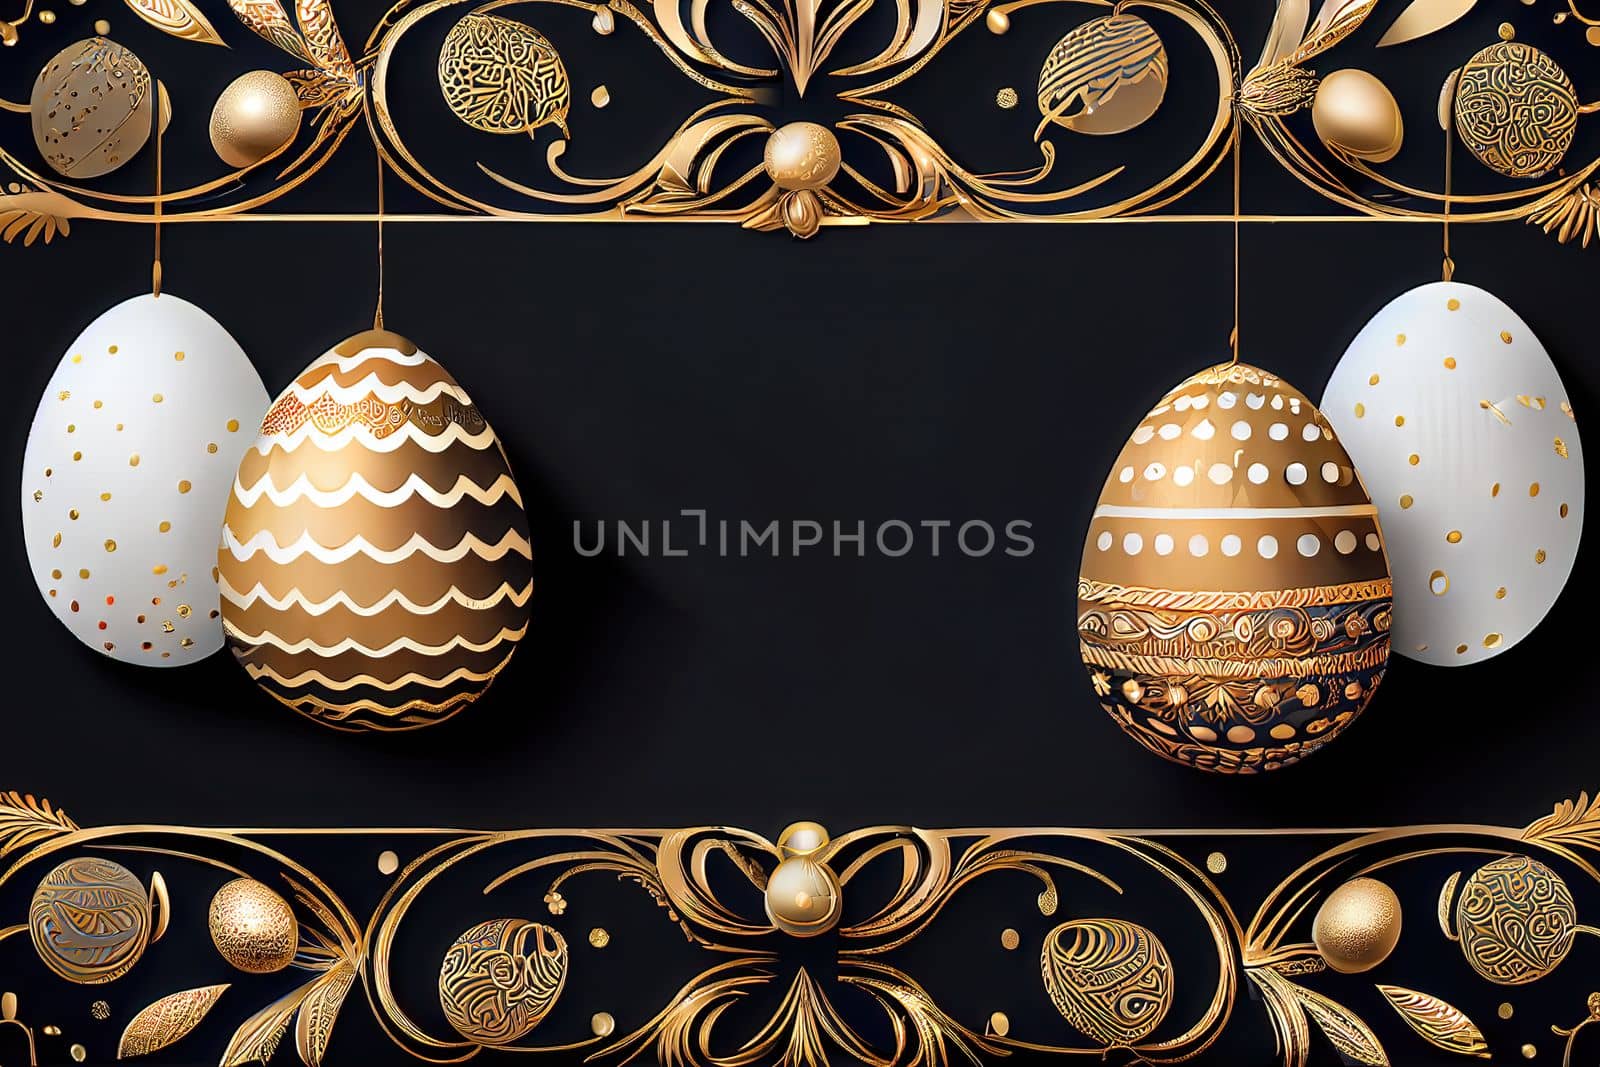 3D render of Easter egg sale banner gold eggs hanging on a thread with copy space. by FokasuArt